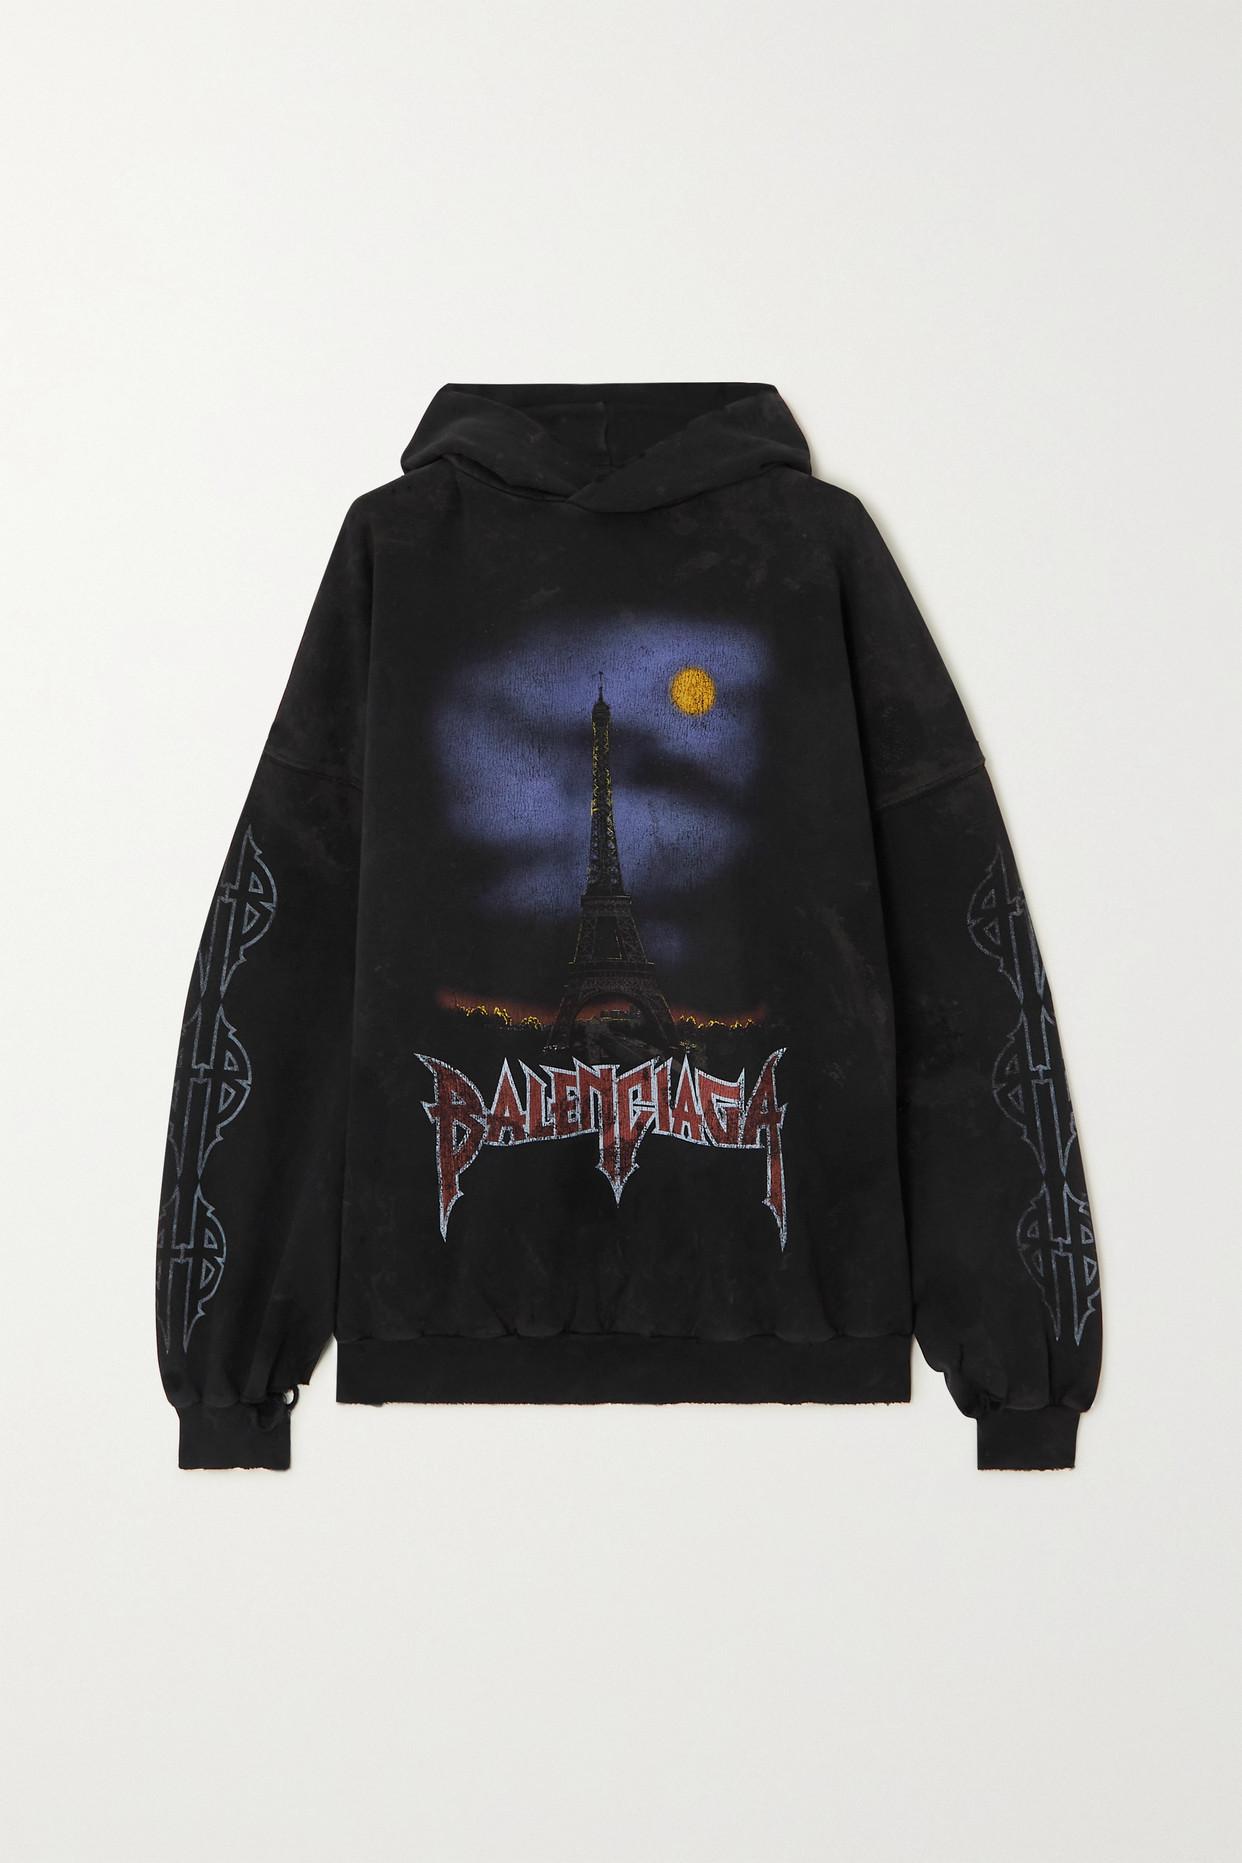 Balenciaga Oversized Distressed Printed Cotton-jersey Hoodie in Black | Lyst